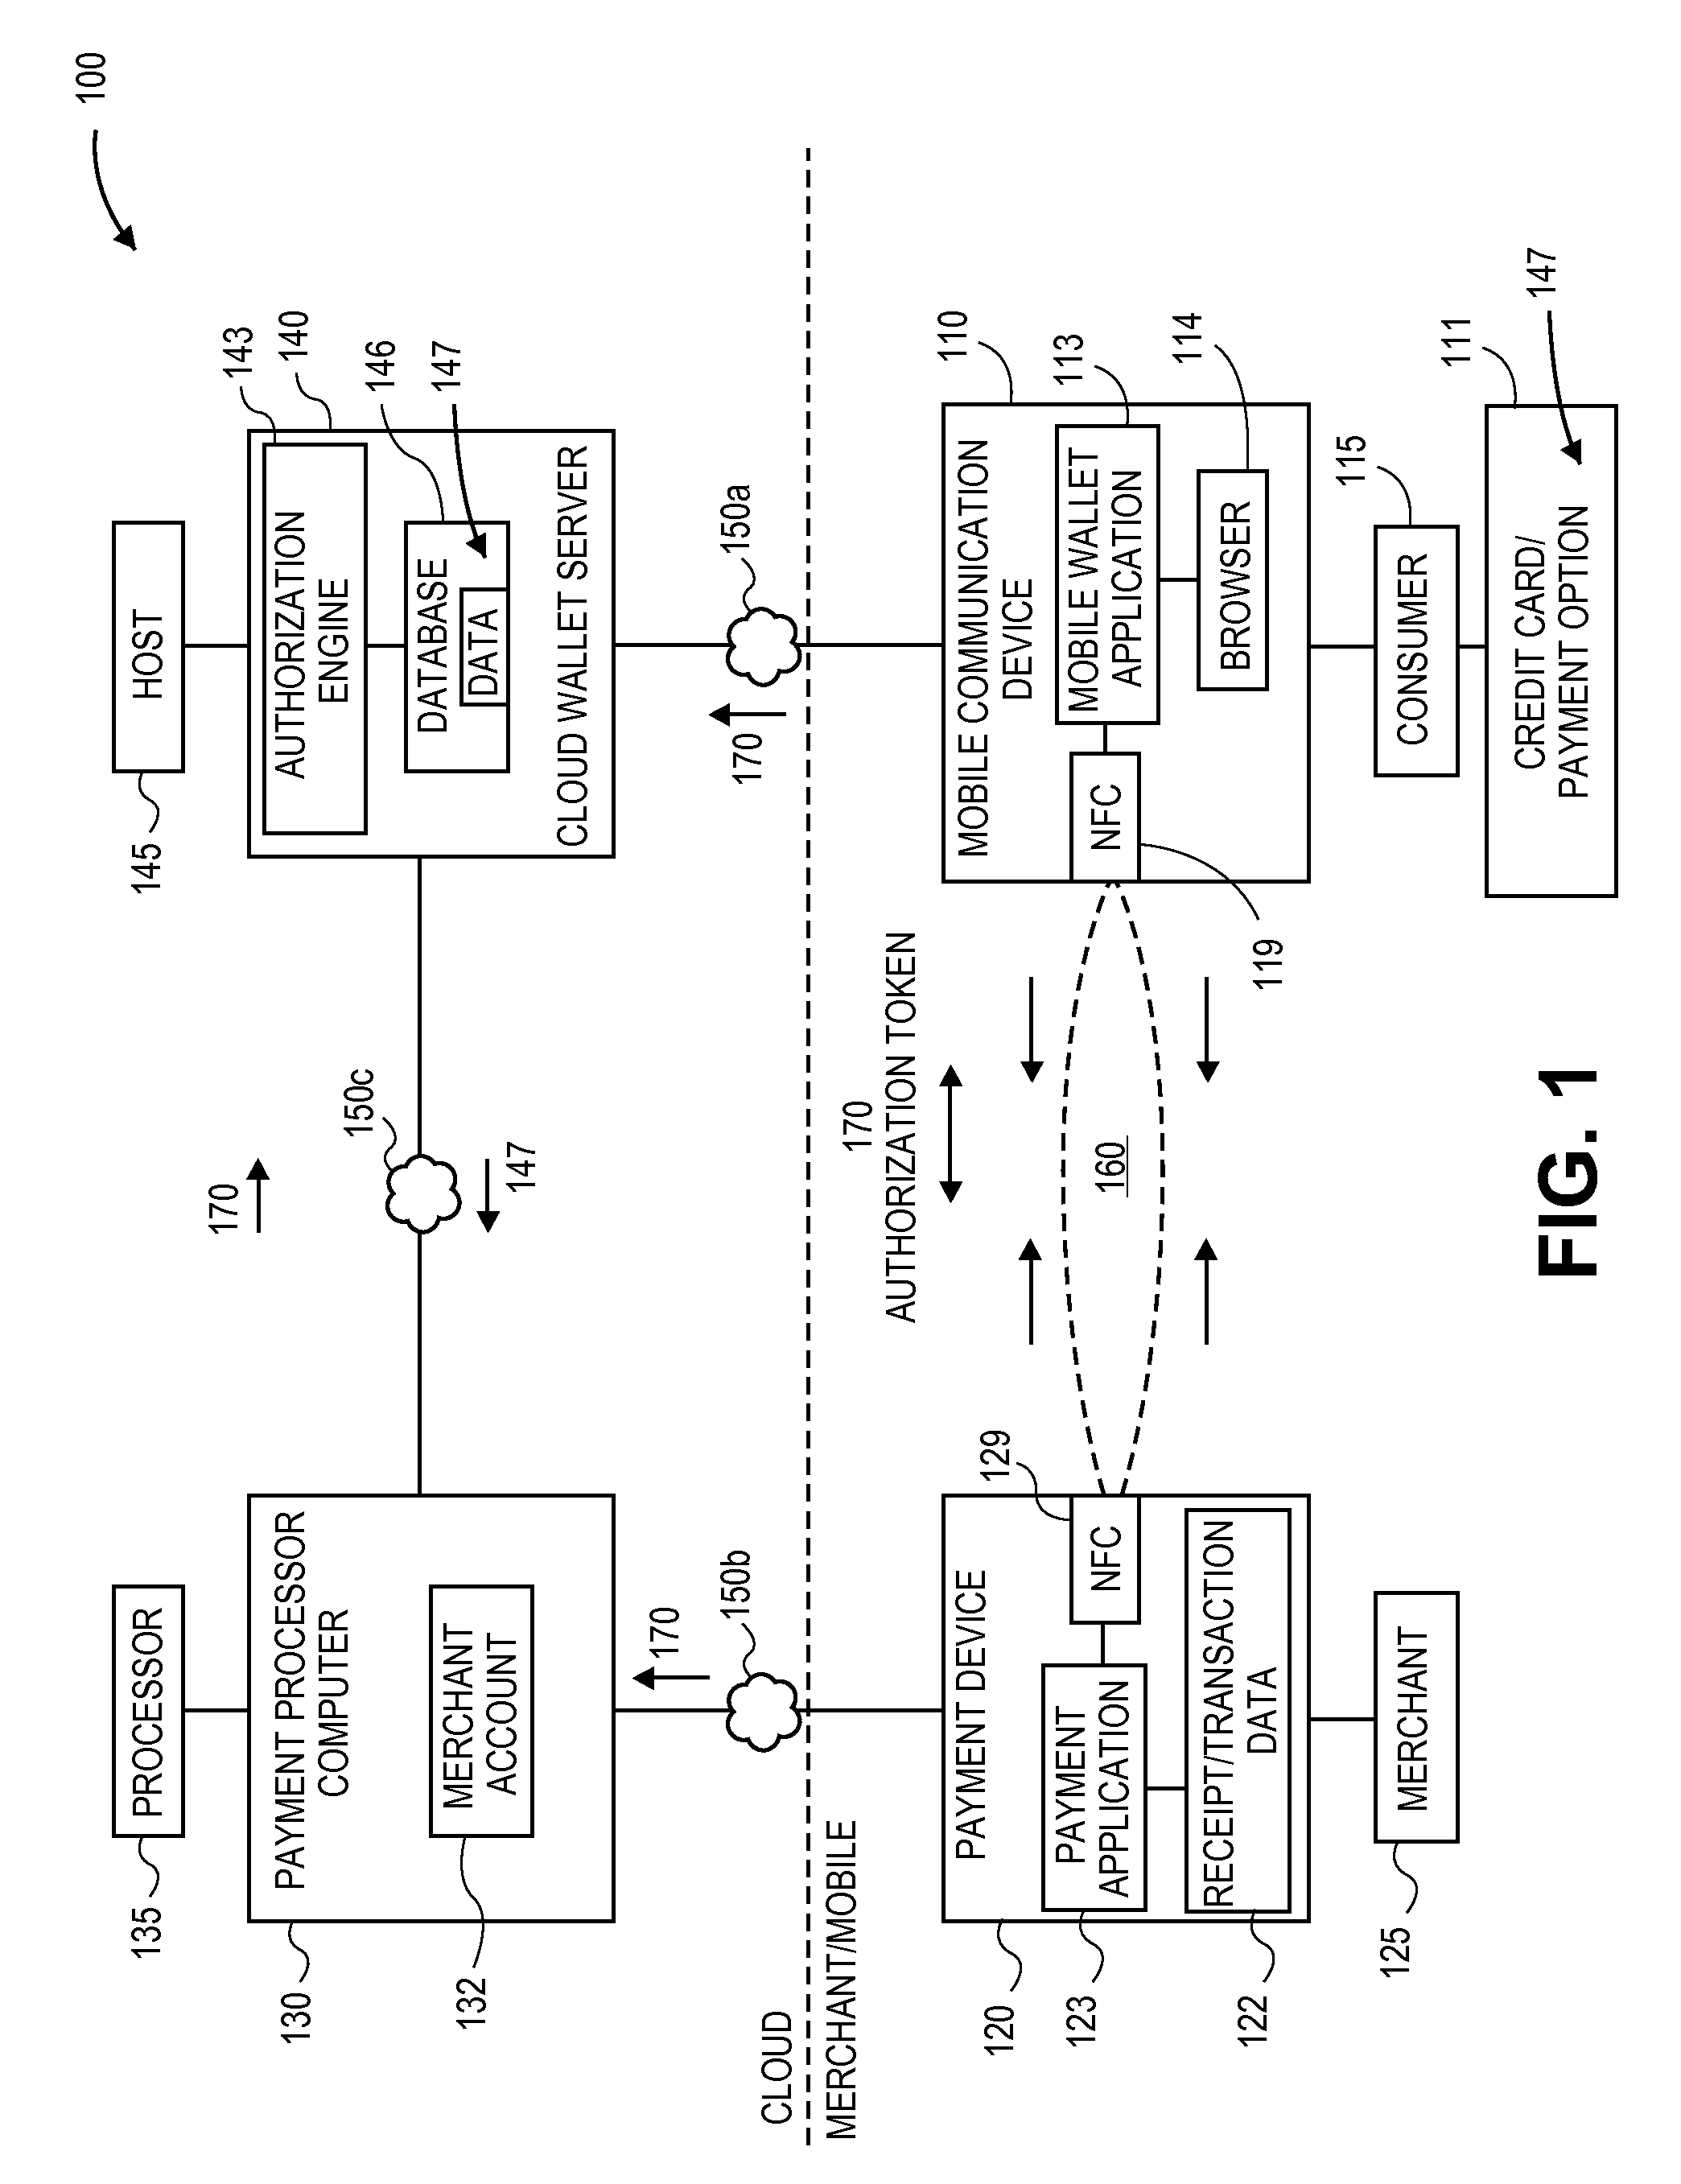 Processing electronic payment involving mobile communication device